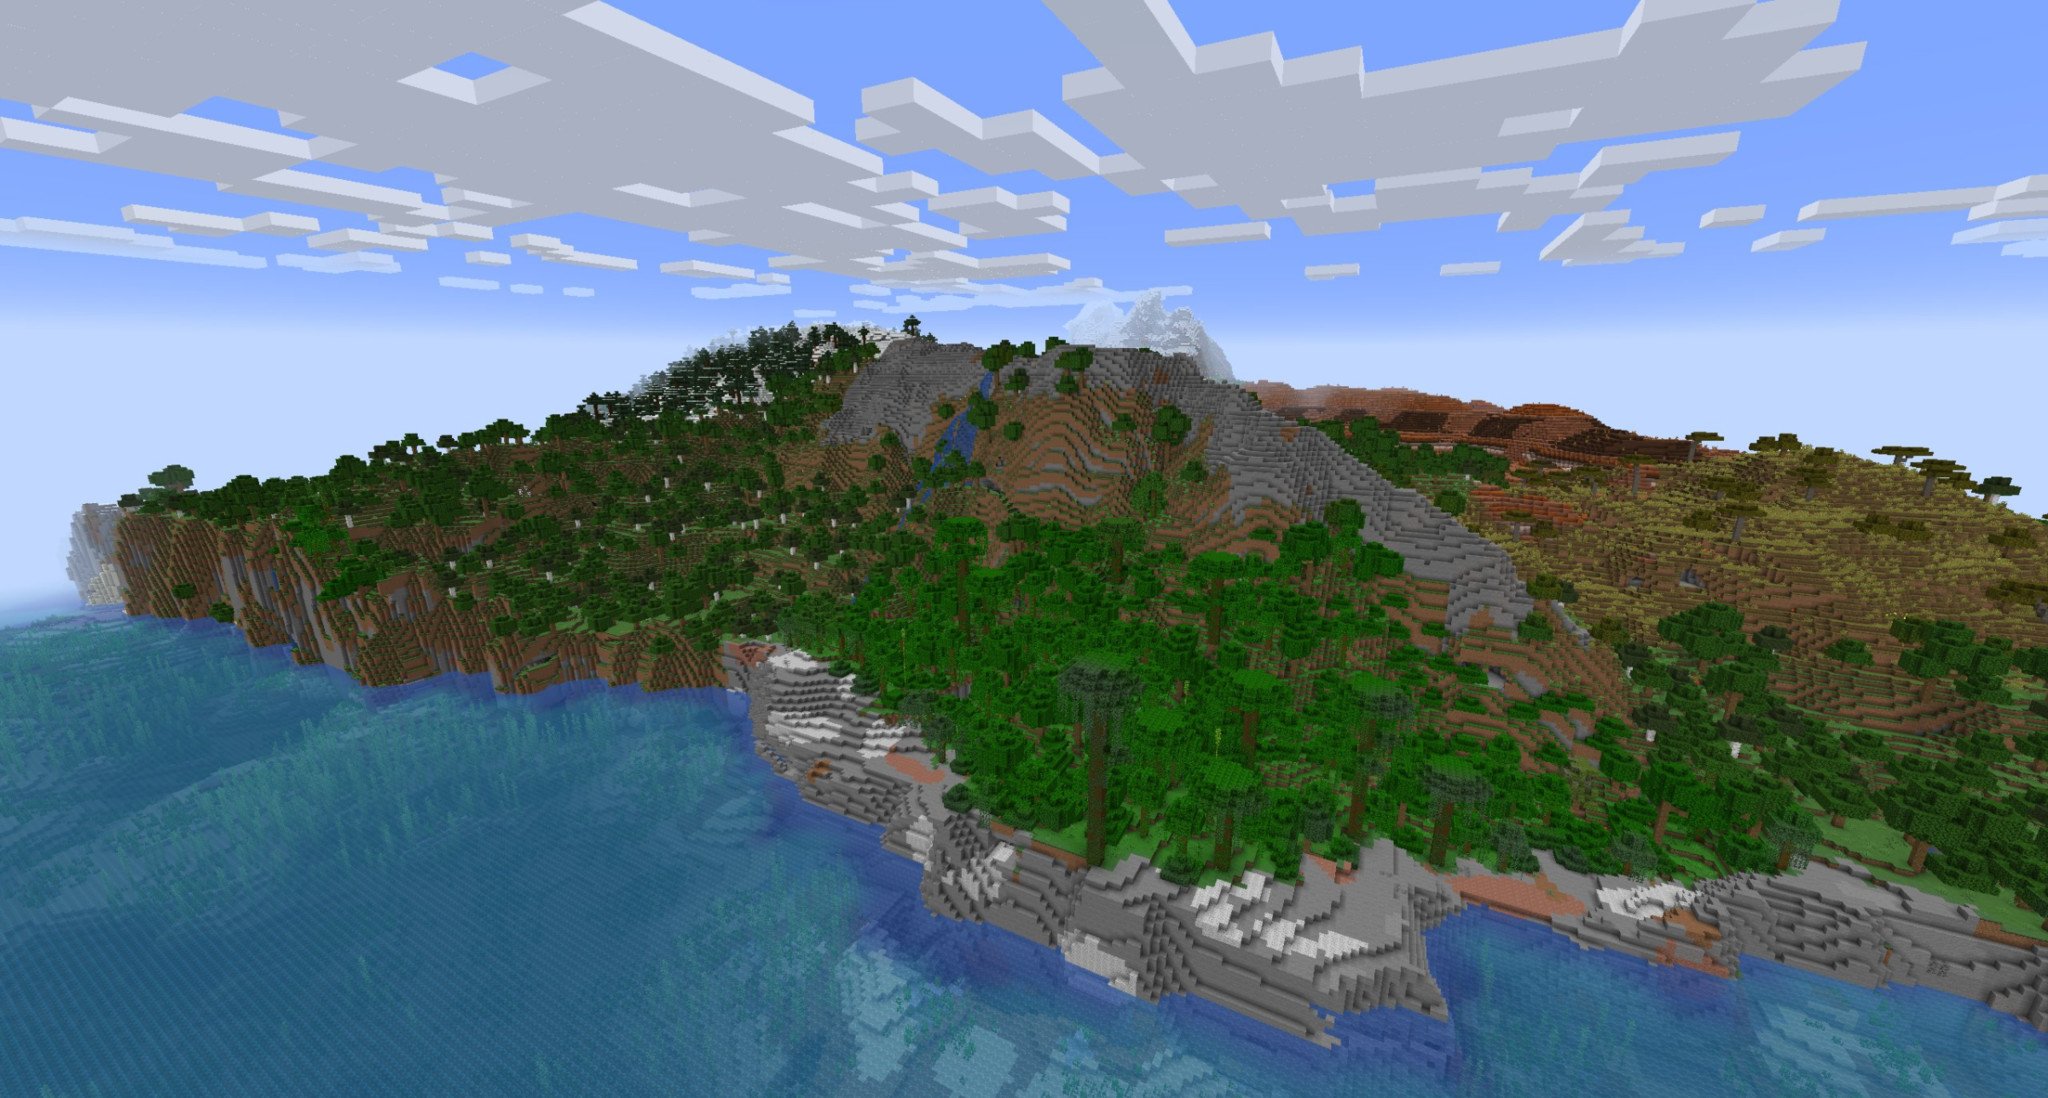 minecraft-caves-and-cliffs-update-1.18-experimental-snapshot-3-image-01.jpg